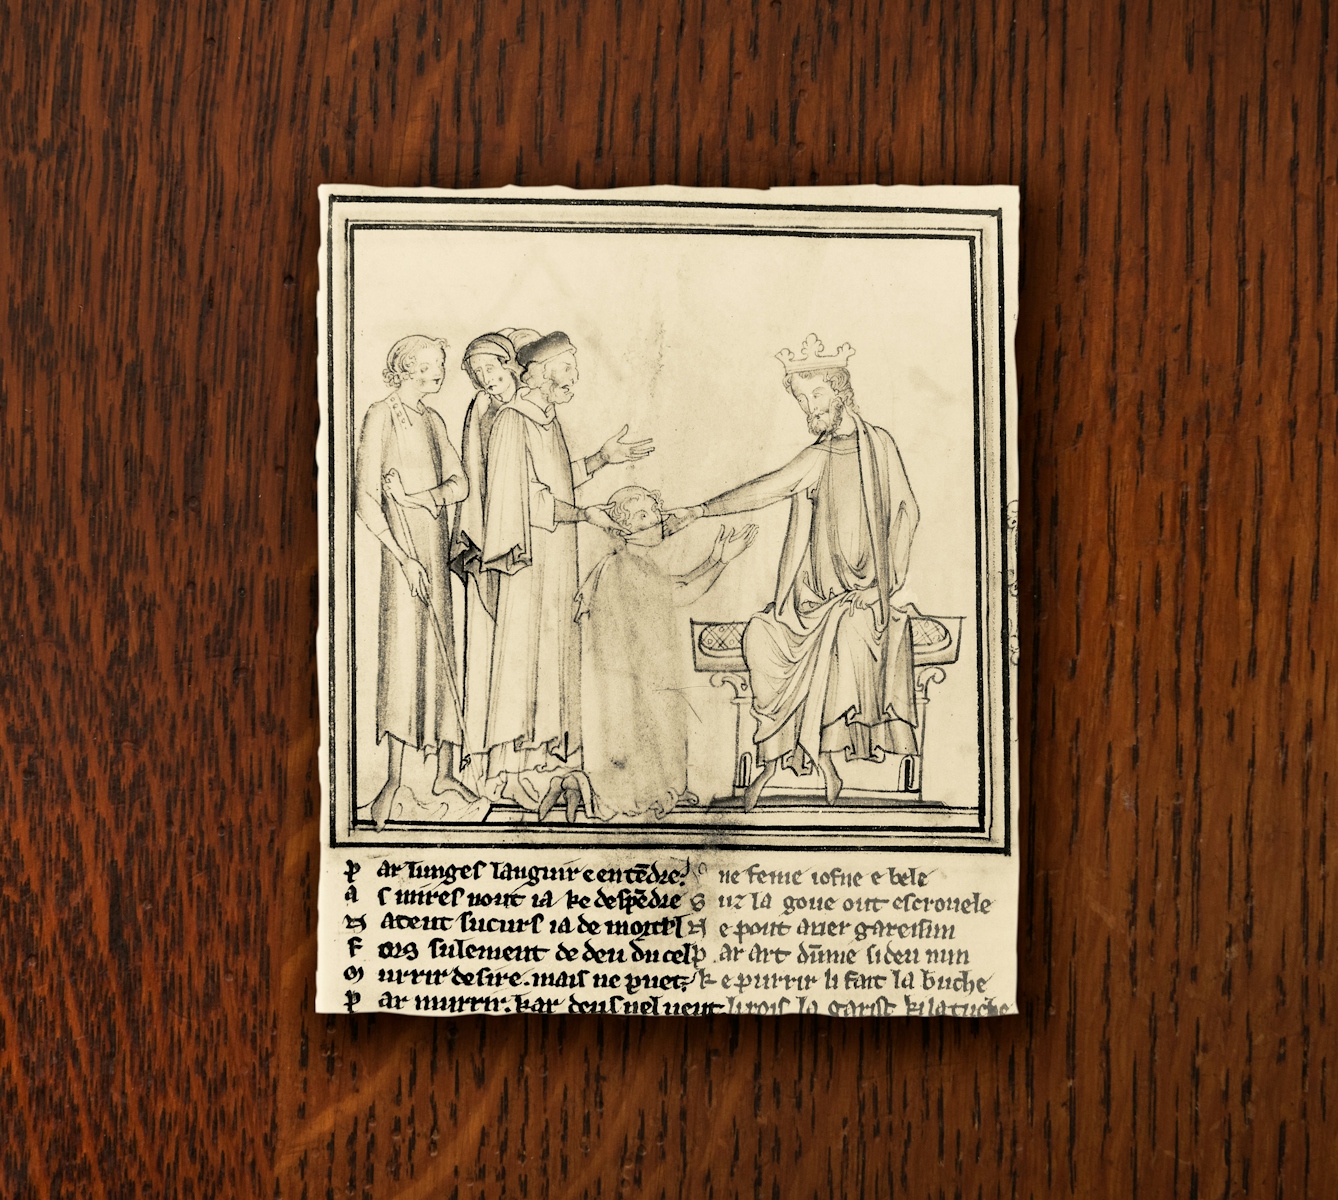 A photograph of an illustration depicting King Edward the Confessor touching the head of a diseased man. The man is kneeling down before the king, his mouth covered with cloth.